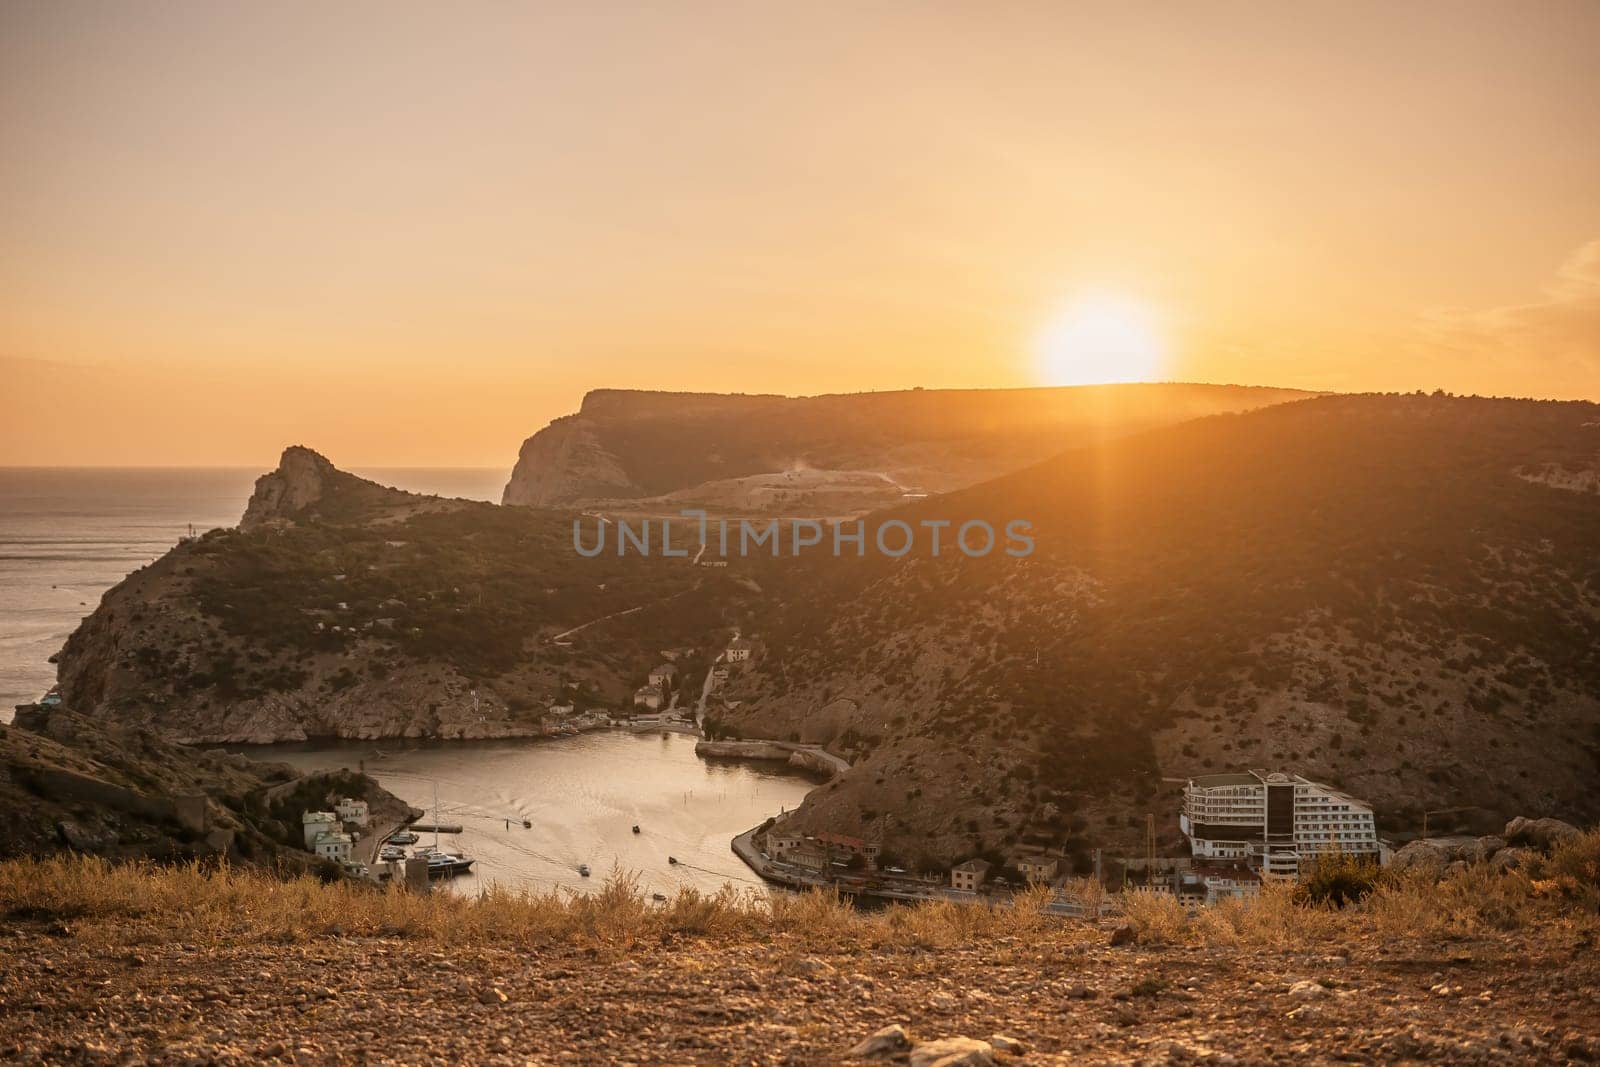 A beautiful sunset over a mountain with a small town in the distance. The sun is setting behind the mountains, casting a warm glow over the landscape. The water in the valley is calm and peaceful